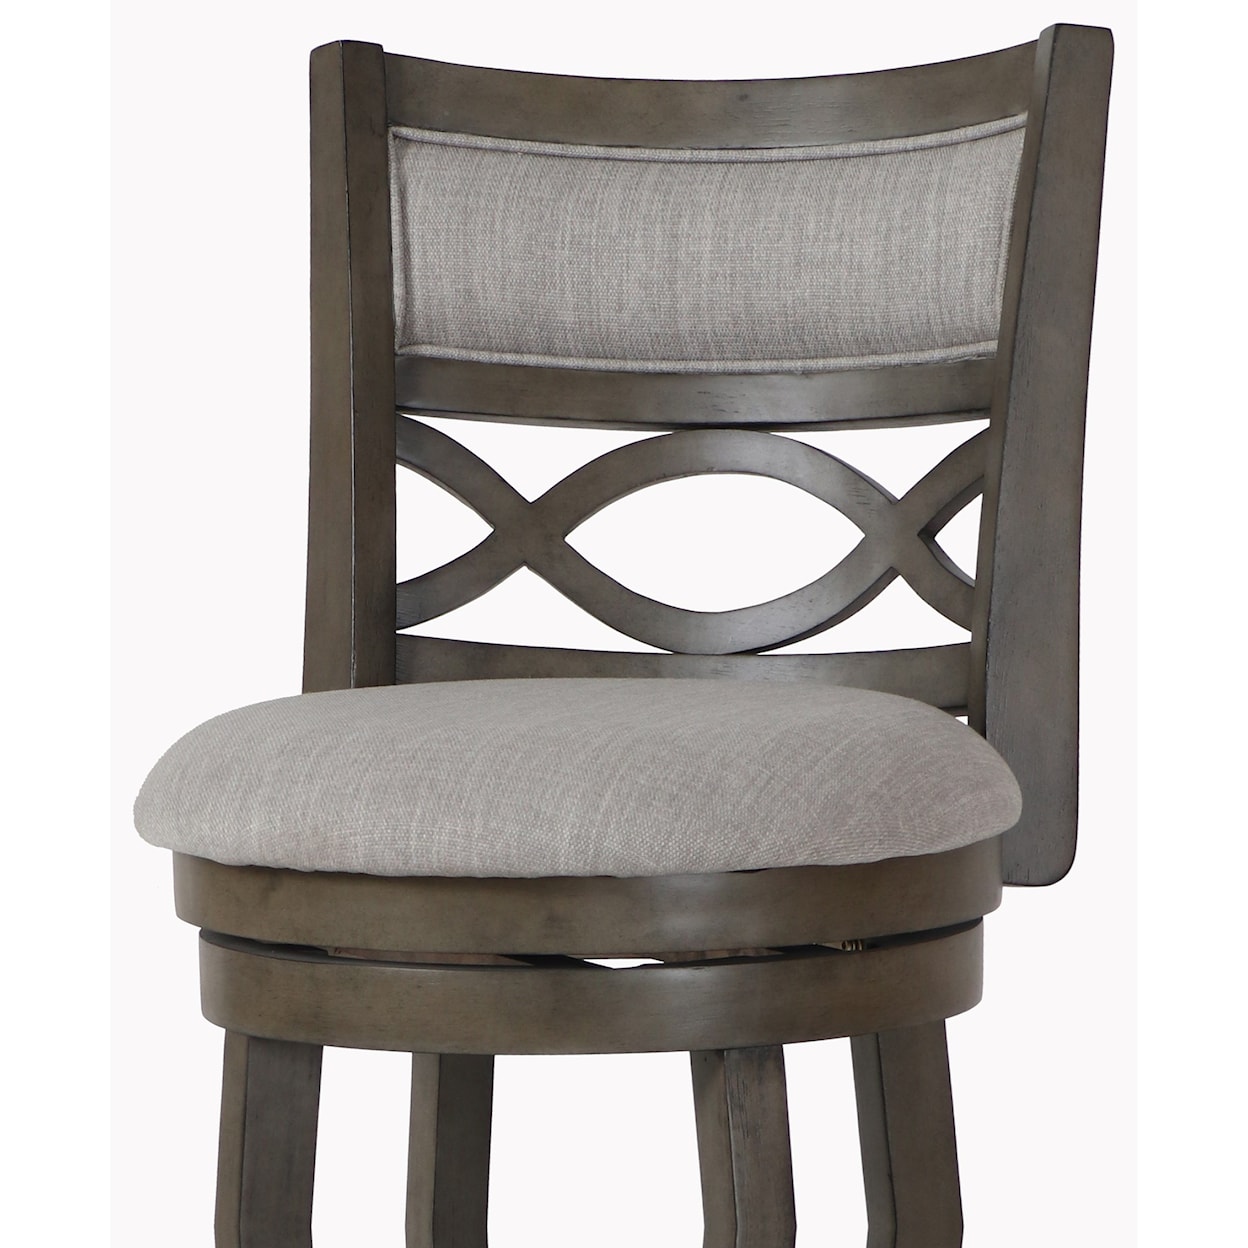 New Classic Manchester 29" Barstool with Fabric Seat